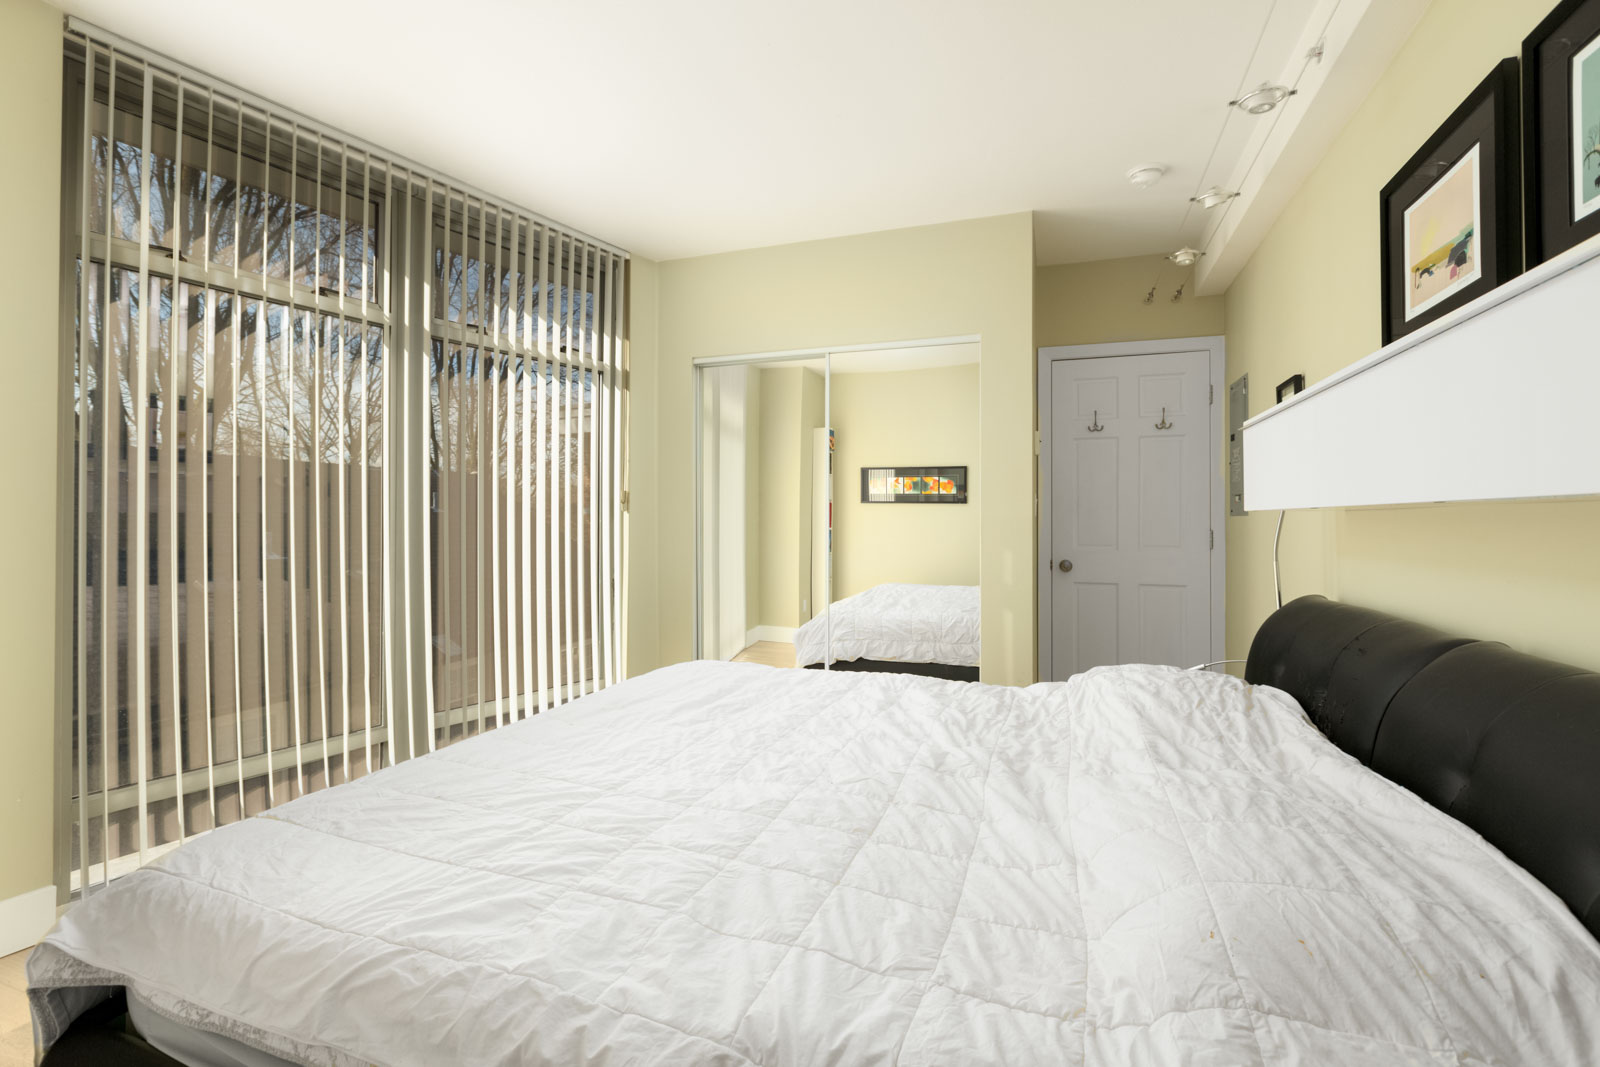 bedroom of rental condo in vancouver with bed with white sheets in foreground and mirrored closed closet and closed door in background